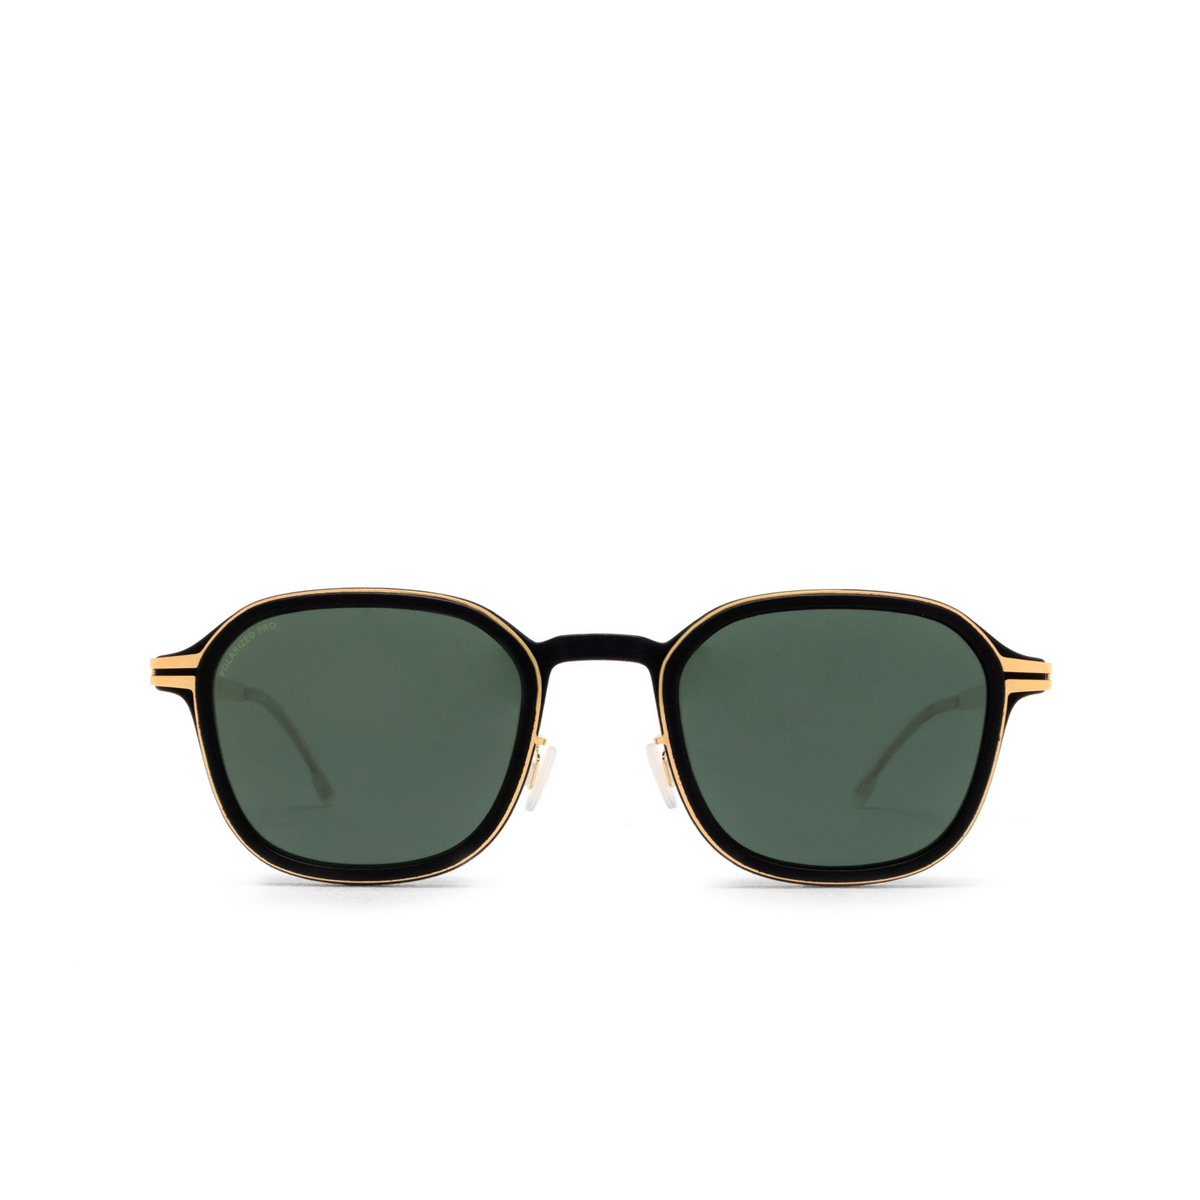 Mykita FIR Sunglasses 306 MH7 Pitch Black/Glossy Gold - front view